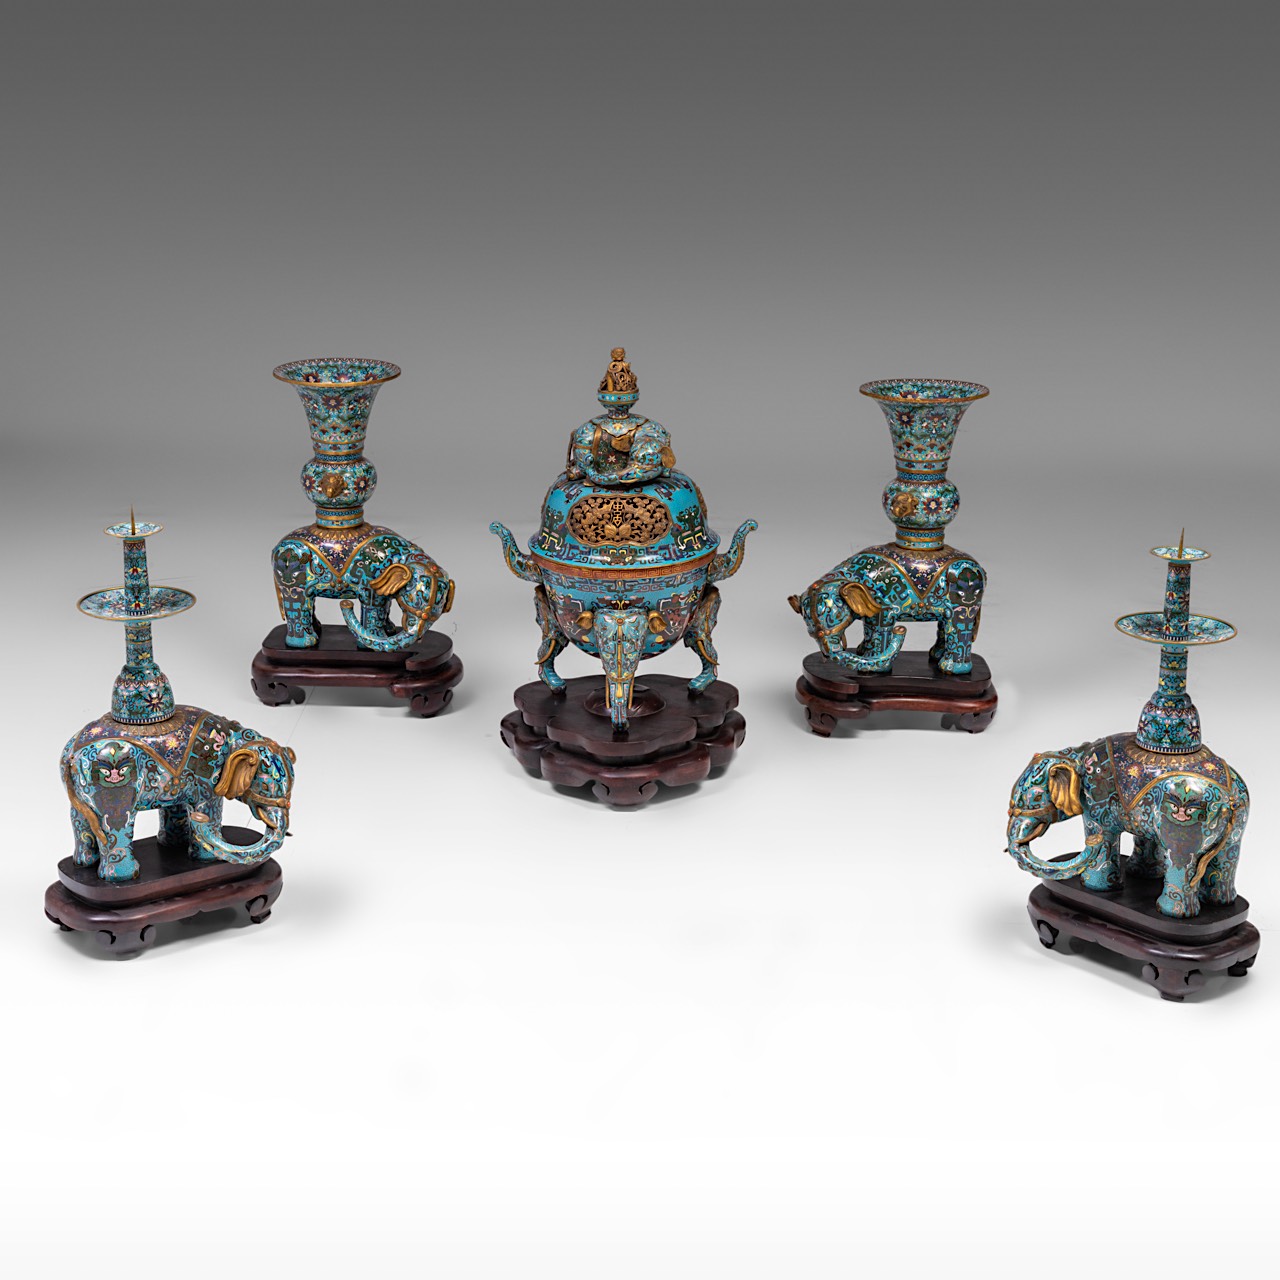 A Chinese five-piece semi-precious stone inlaid cloisonne garniture, late Qing/20thC, tallest H 58 - - Image 24 of 24